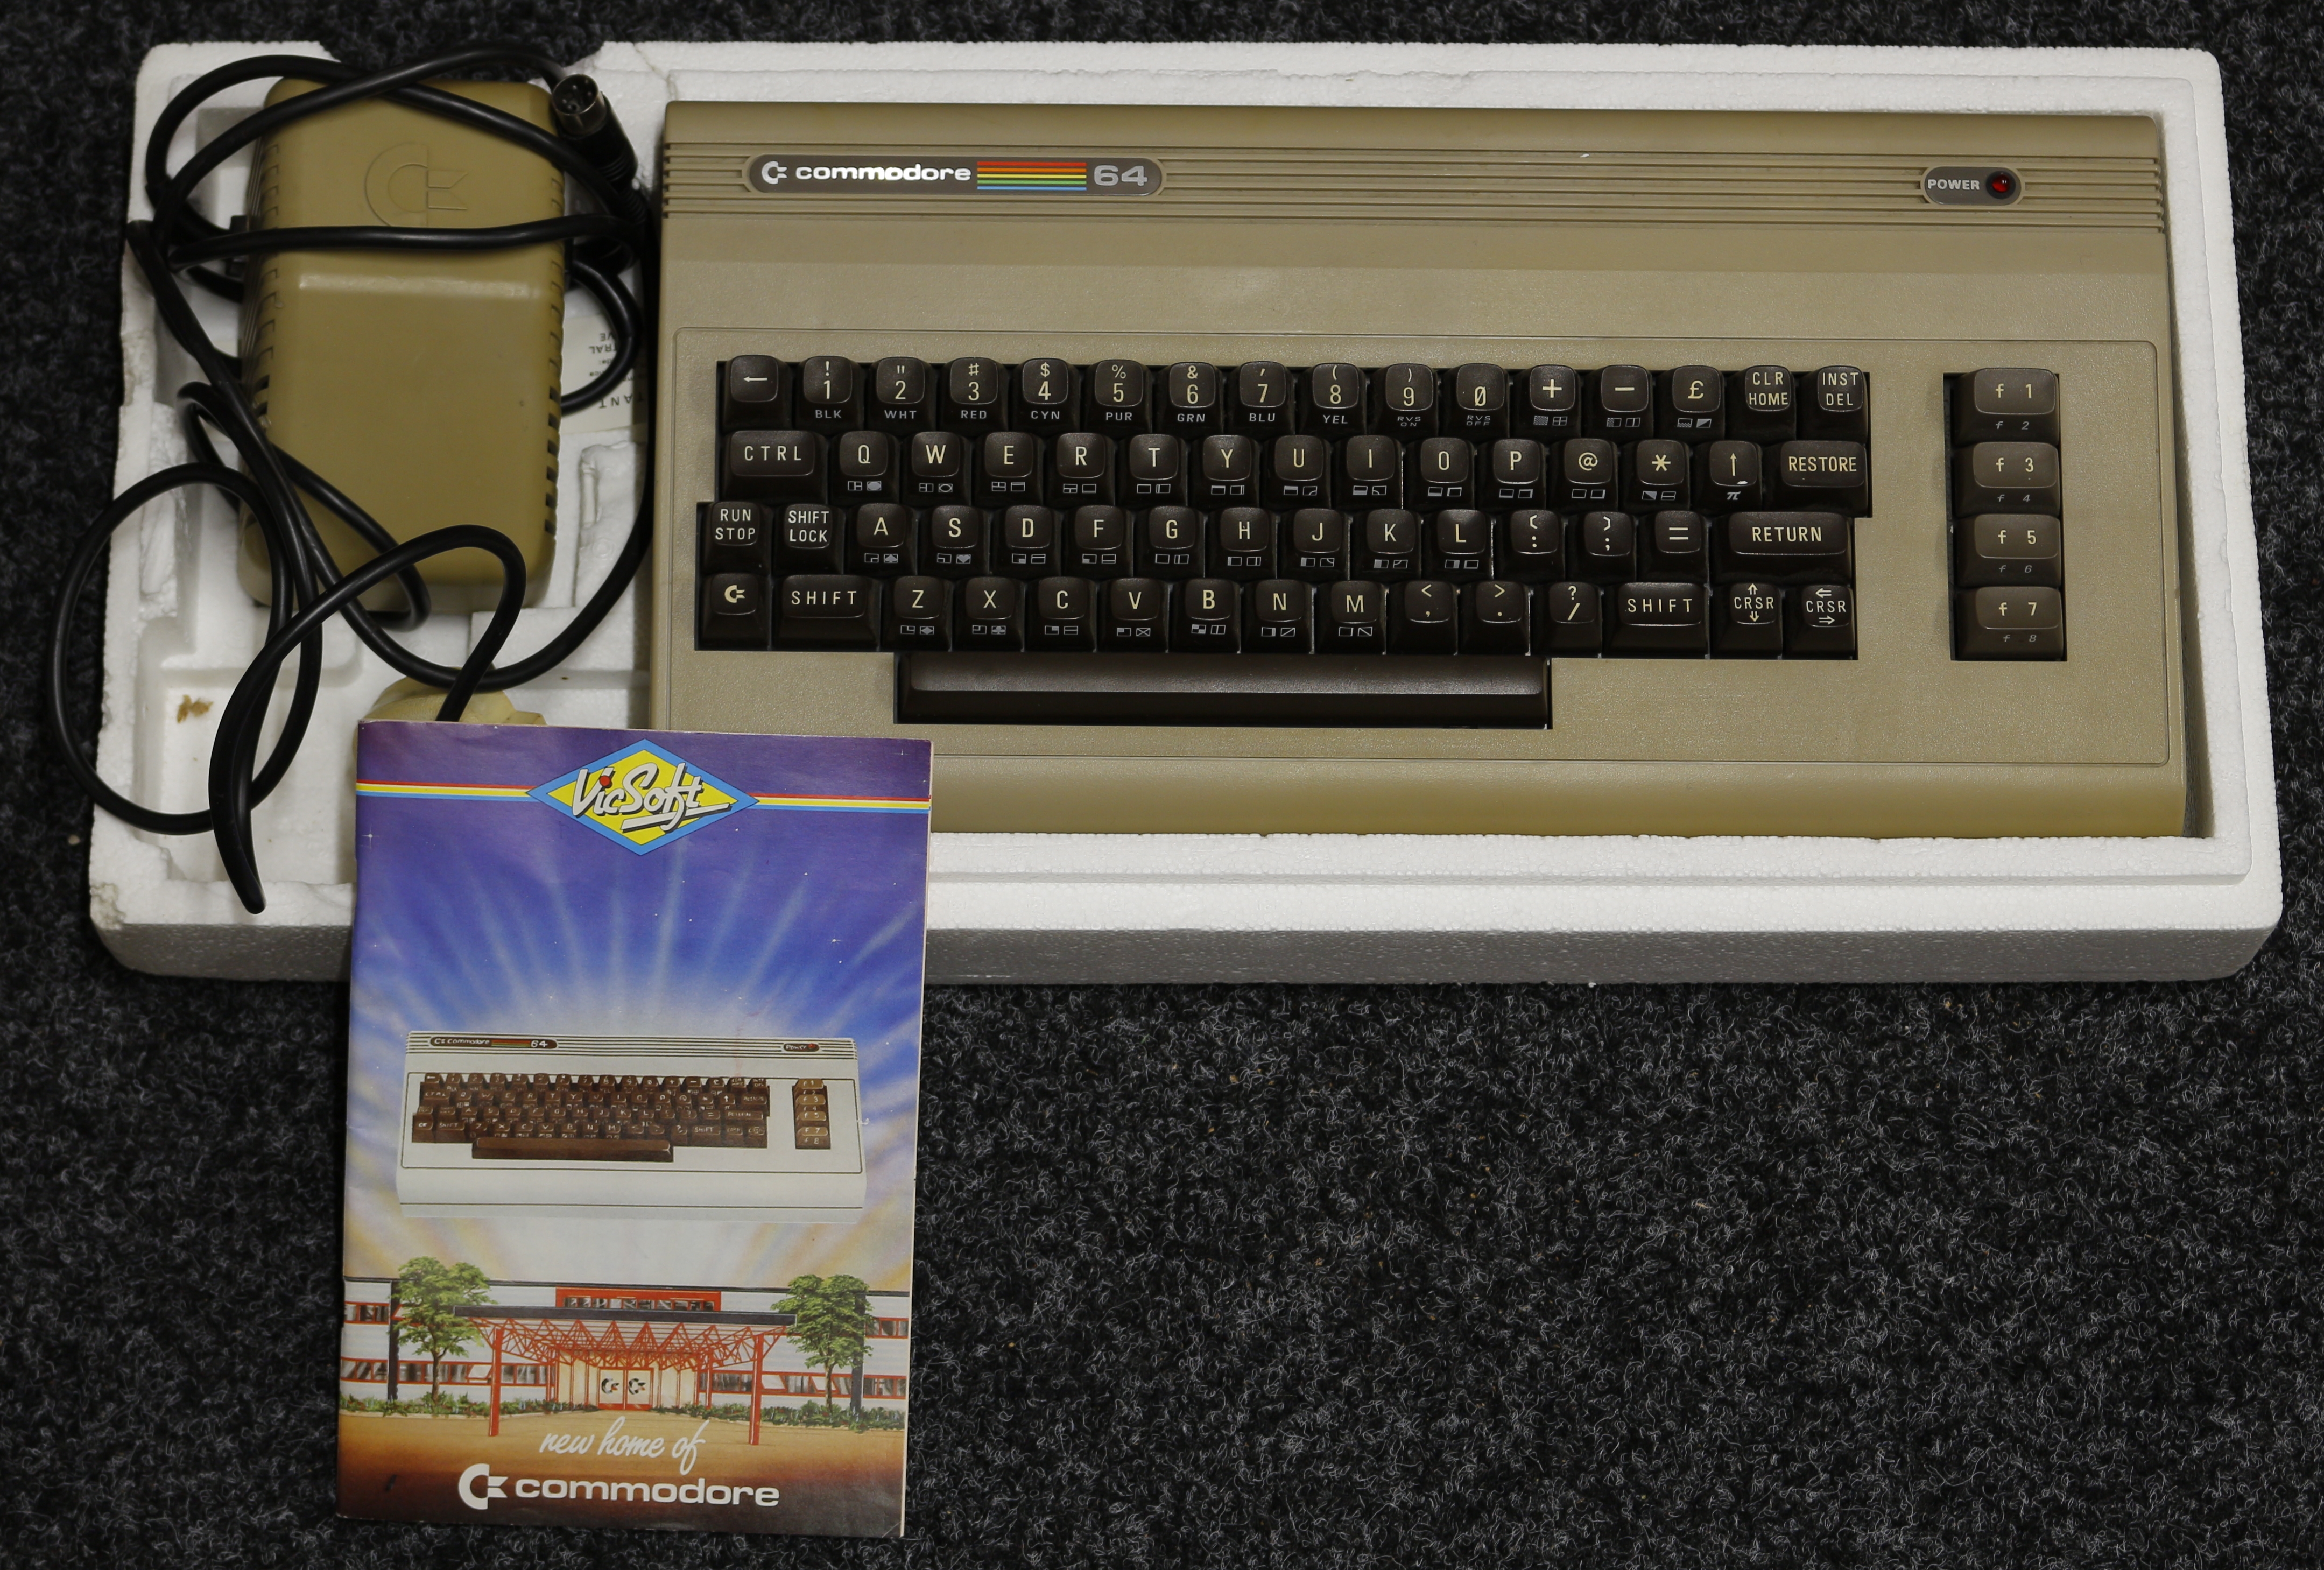 Vintage Gaming and Technology - a Commodore Computer Commodore64 microcomputer, Serial No. U.K.B - Image 2 of 2